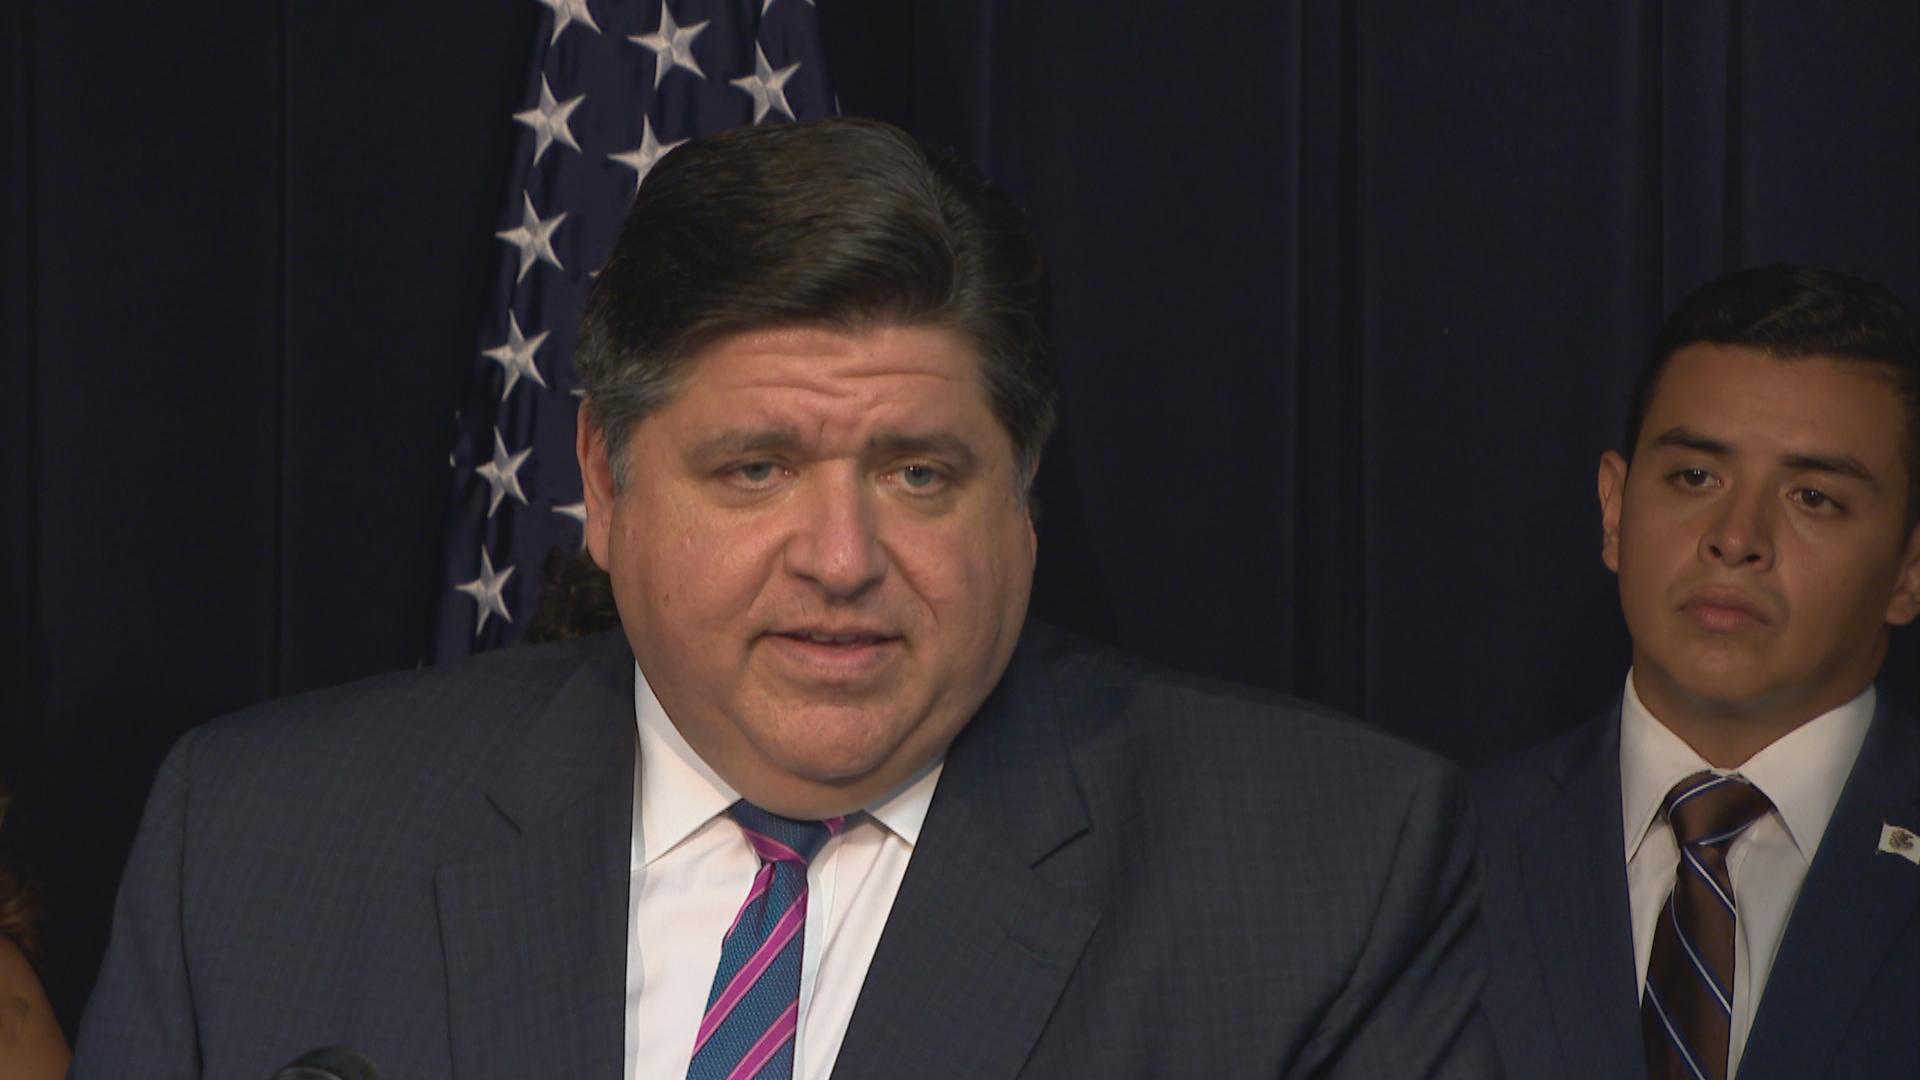 “The culture of sexual harassment exists in Springfield on both sides of the aisle,” Gov. J.B. Pritzker said Wednesday, Aug. 21, 2019, a day after a report on workplace culture in the Illinois House was released. (WTTW News)